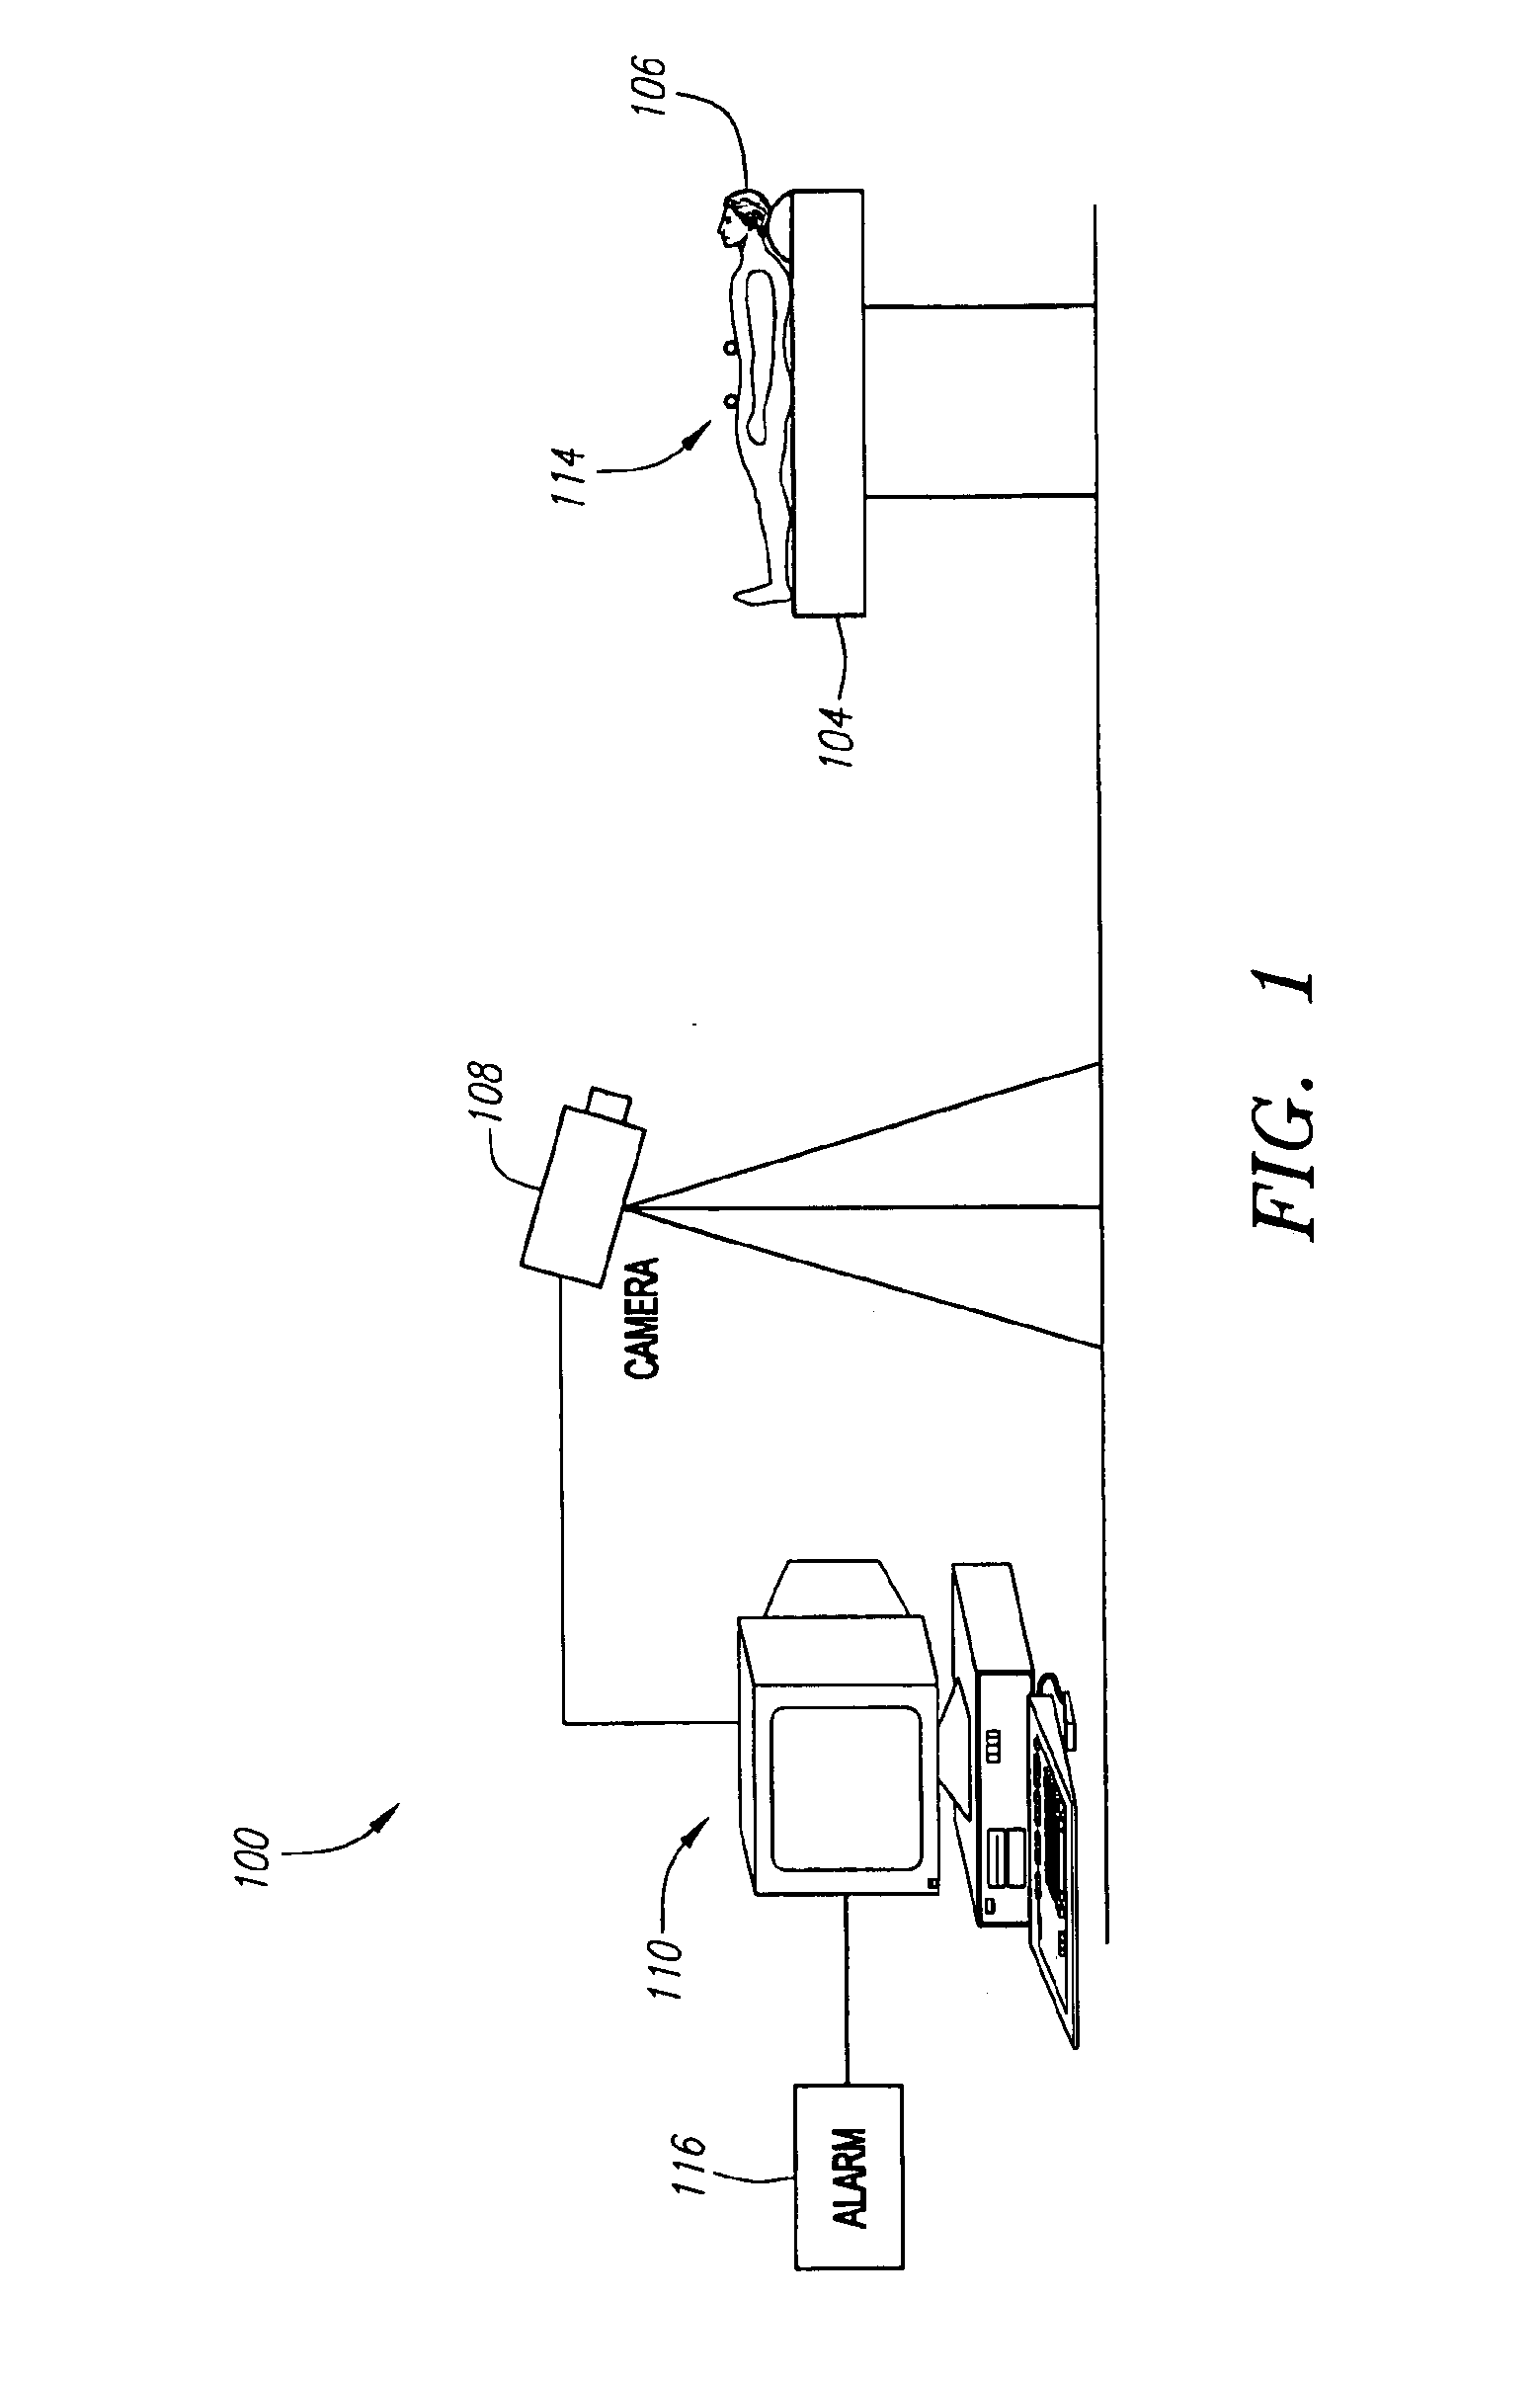 Method and system for monitoring breathing activity of a subject